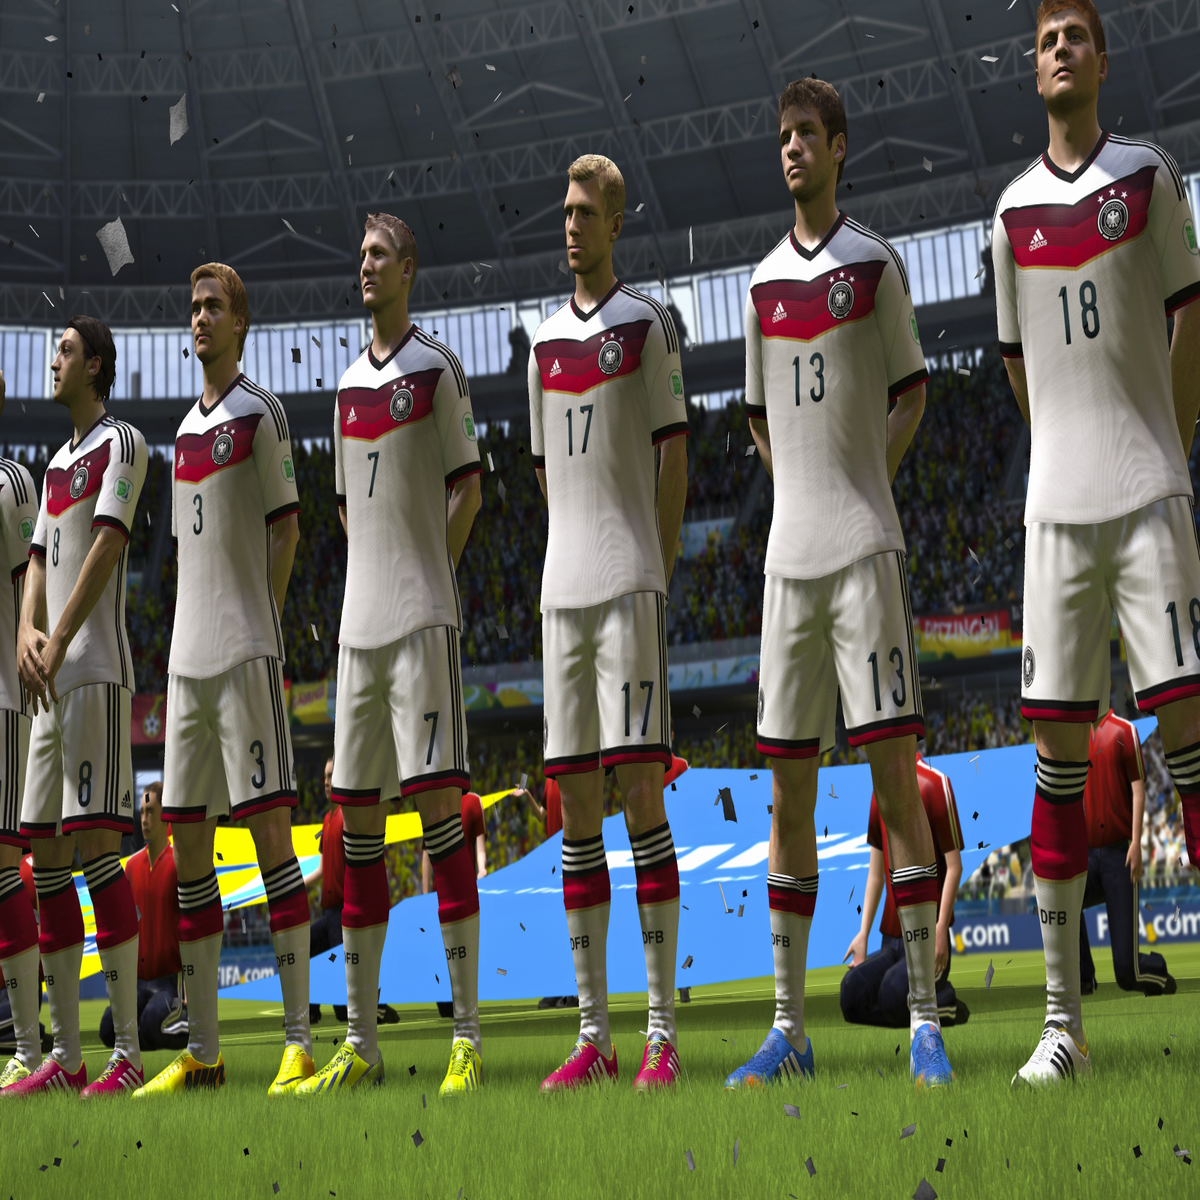 EA's FIFA World Cup 2014 may have the best selection of US kits in